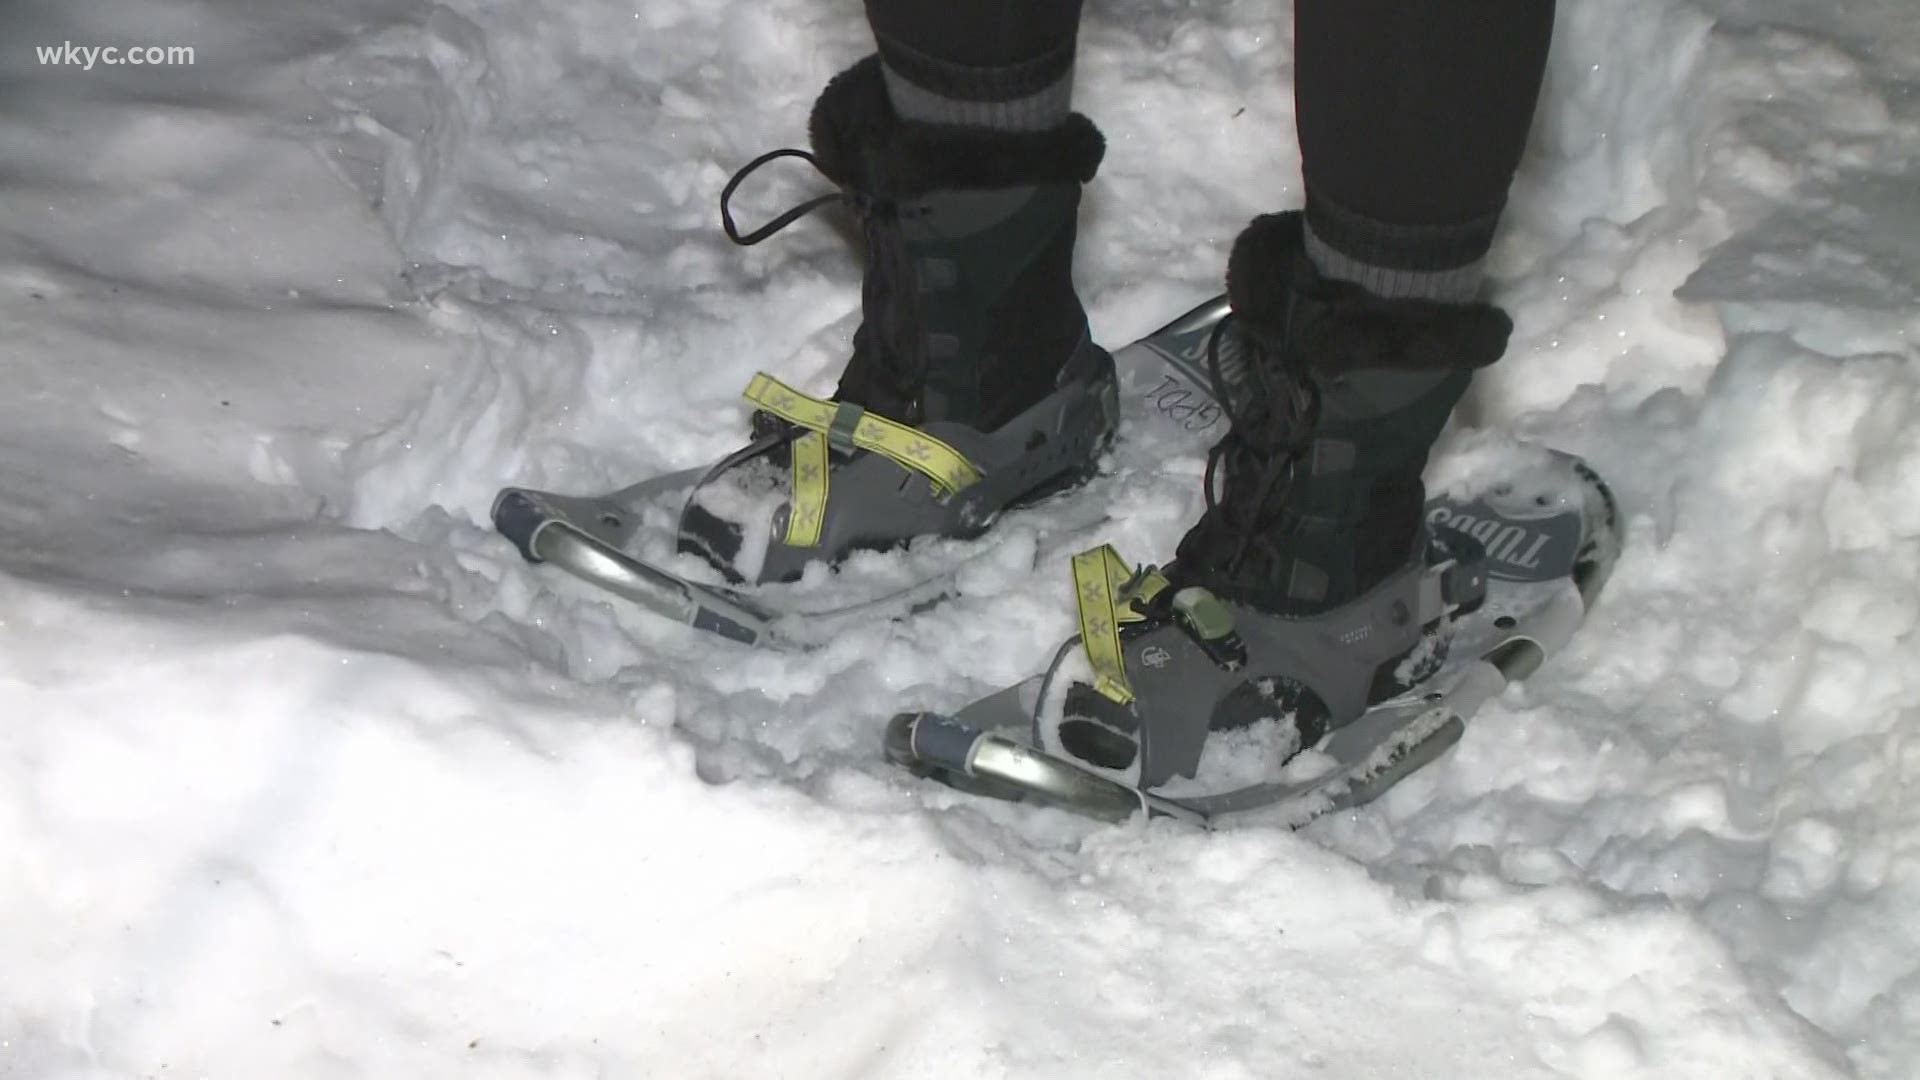 We've all heard of skiing, tubing, and a few other fun winter activities. But, have you ever tried snowshoeing?